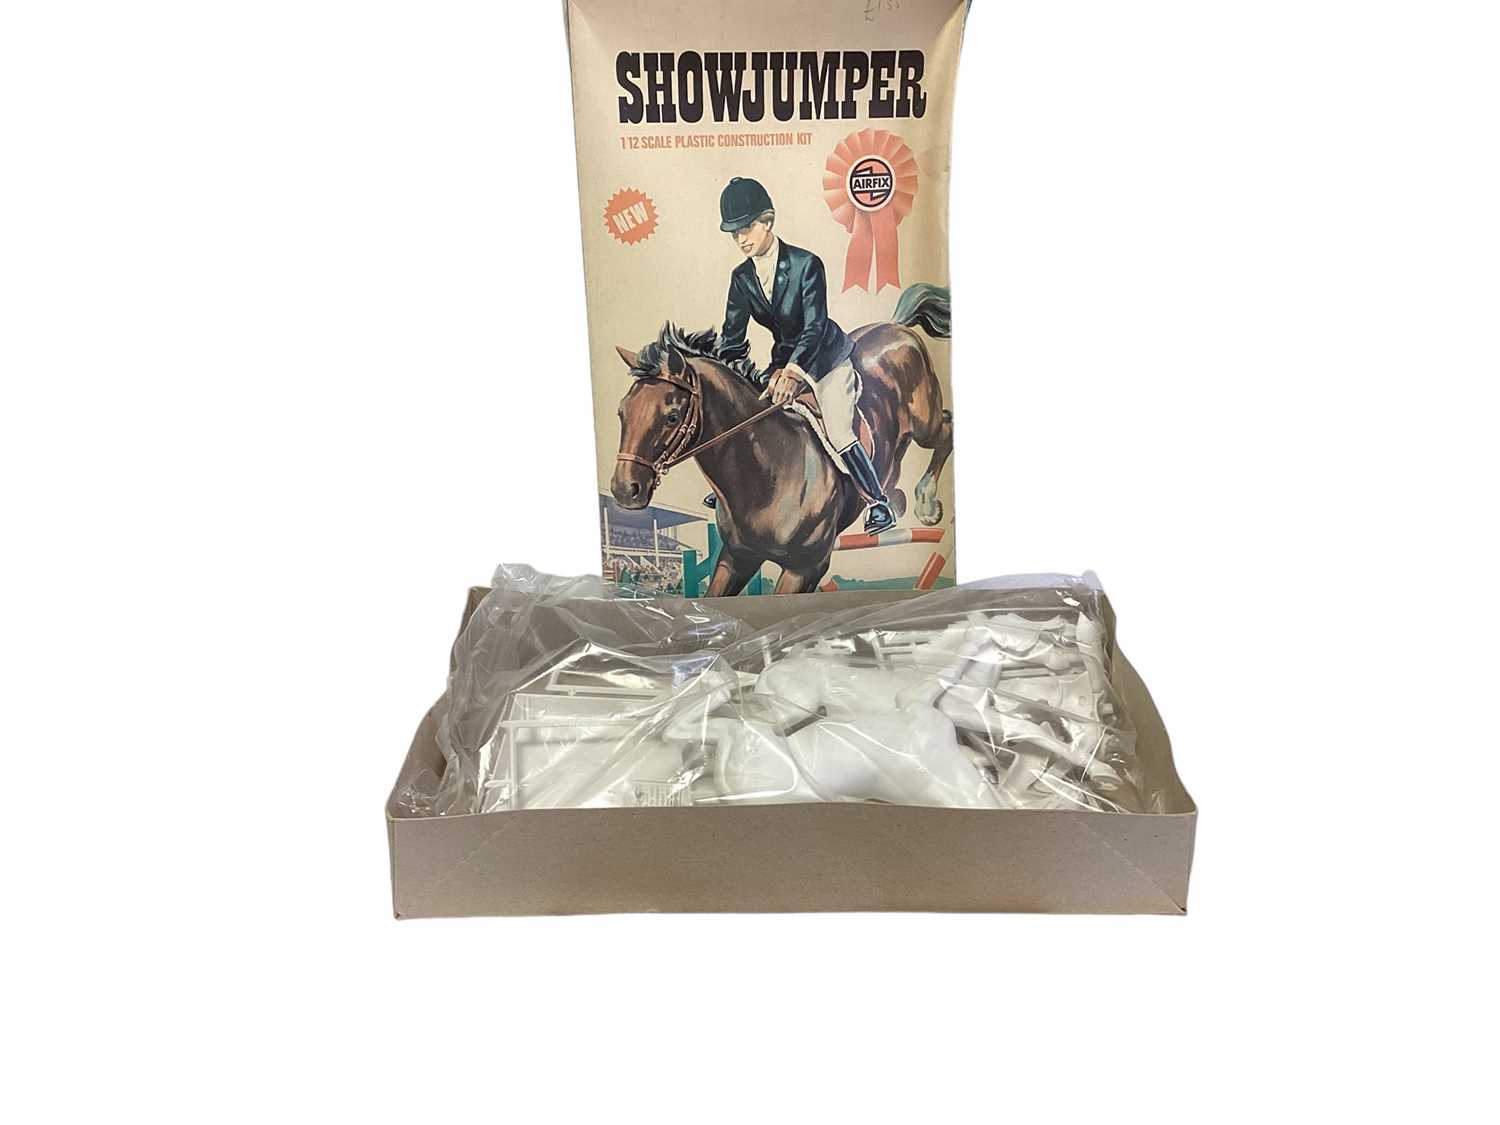 Airfix 1:12 Scale Series & Showjumper plastic construction kits, boxed (2) - Image 2 of 2